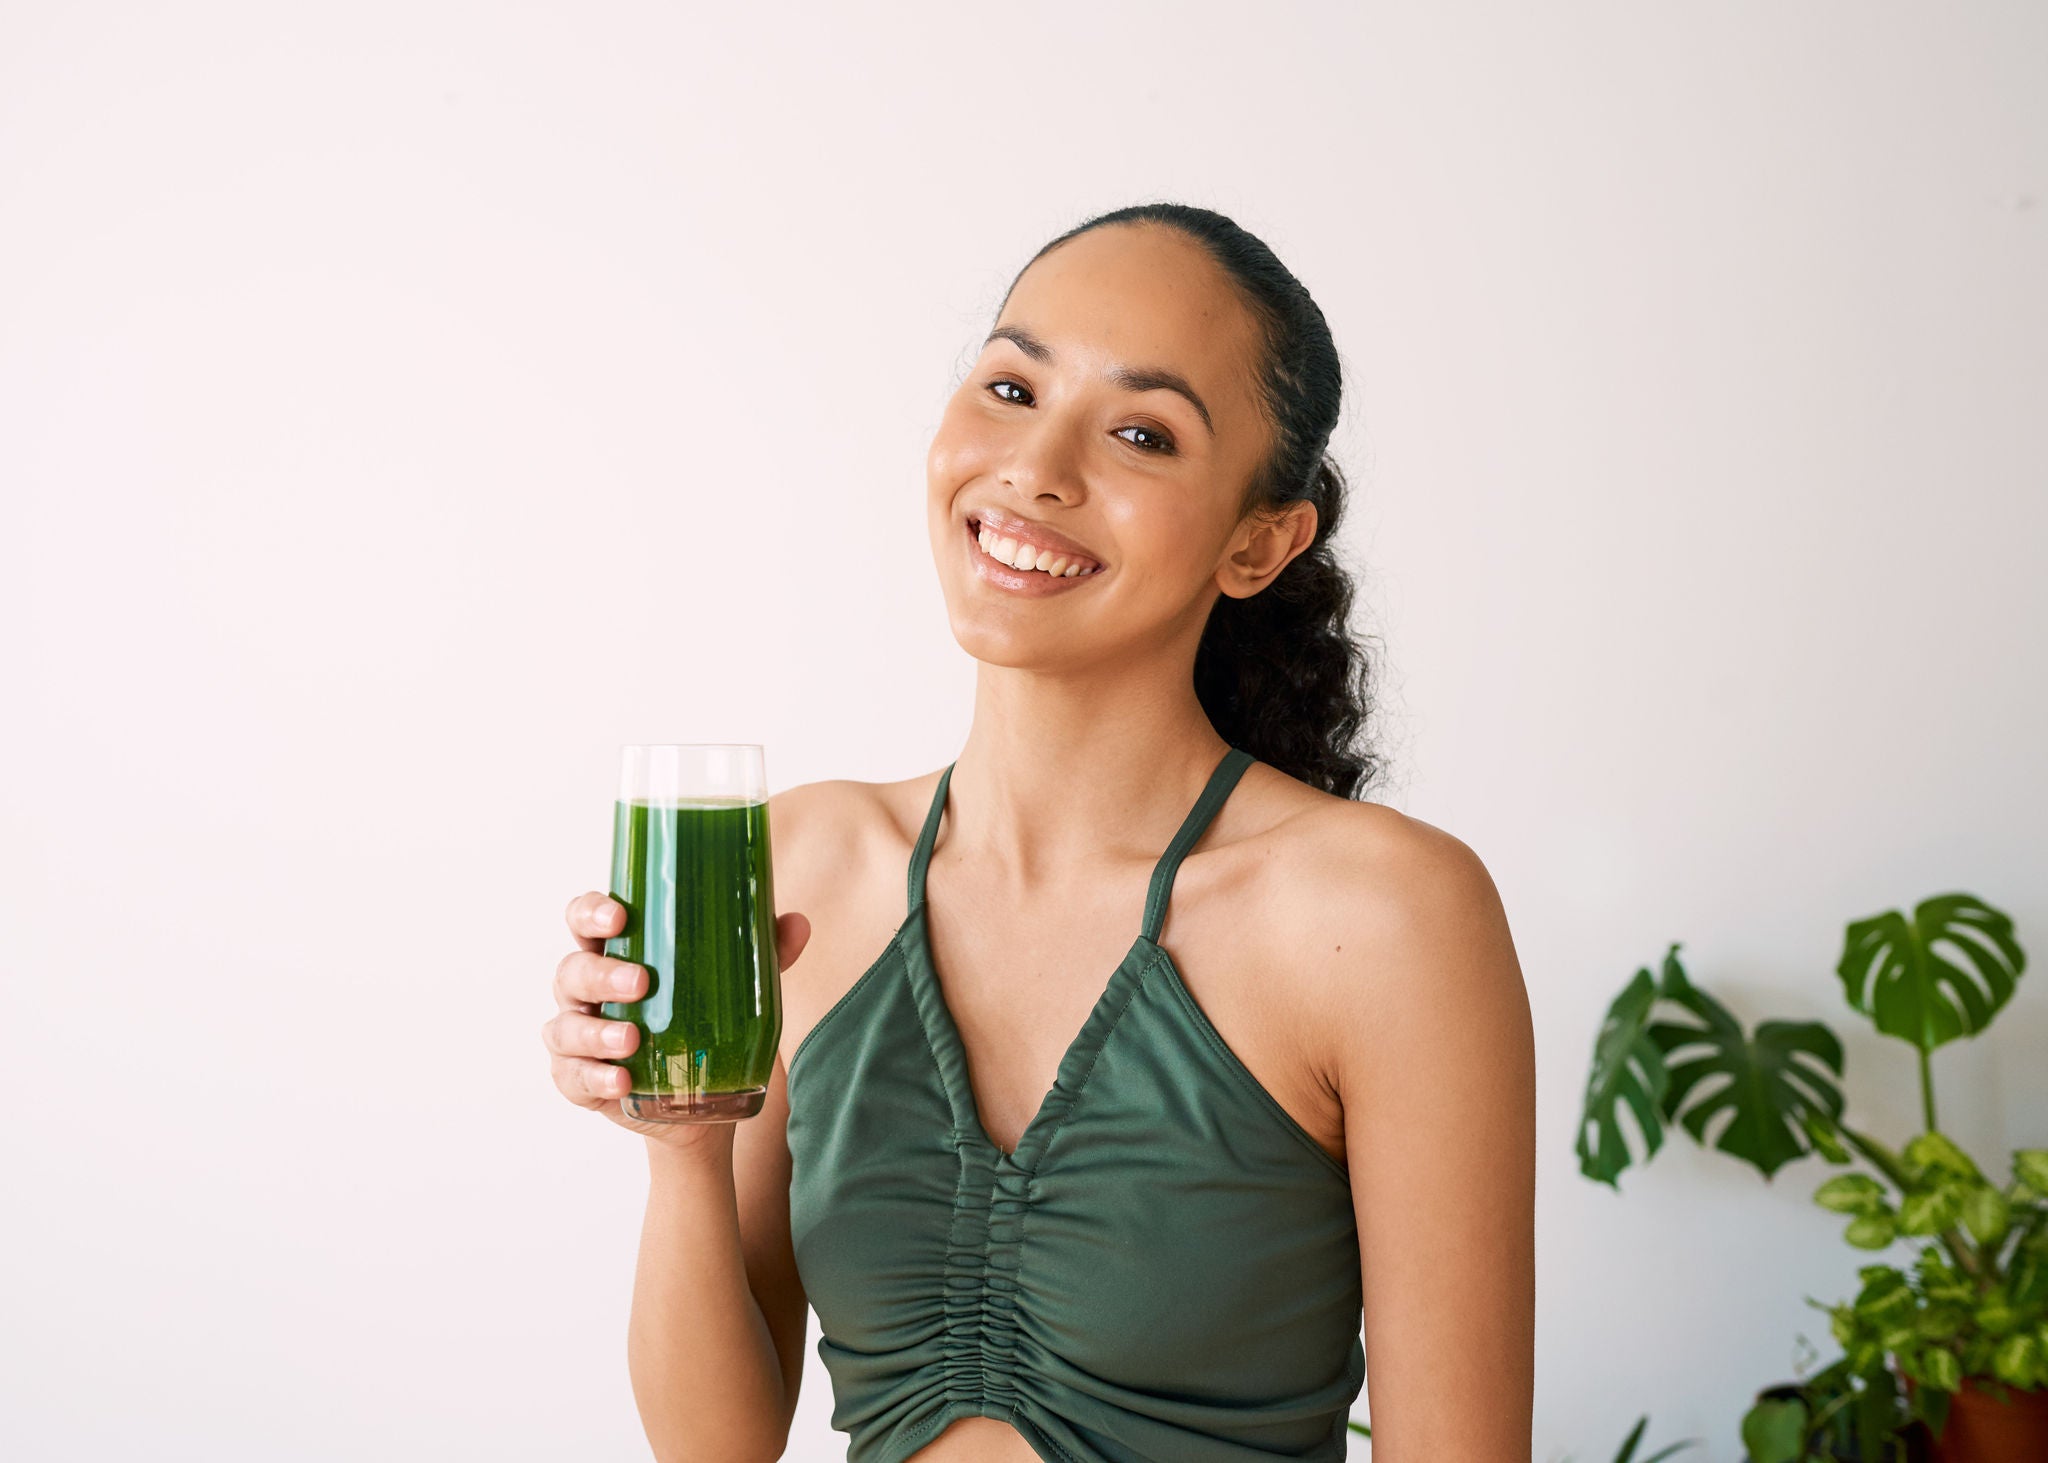 A beautiful multi-ethnic woman smiles with green juice - spinach, kale, vitamans. High quality photo